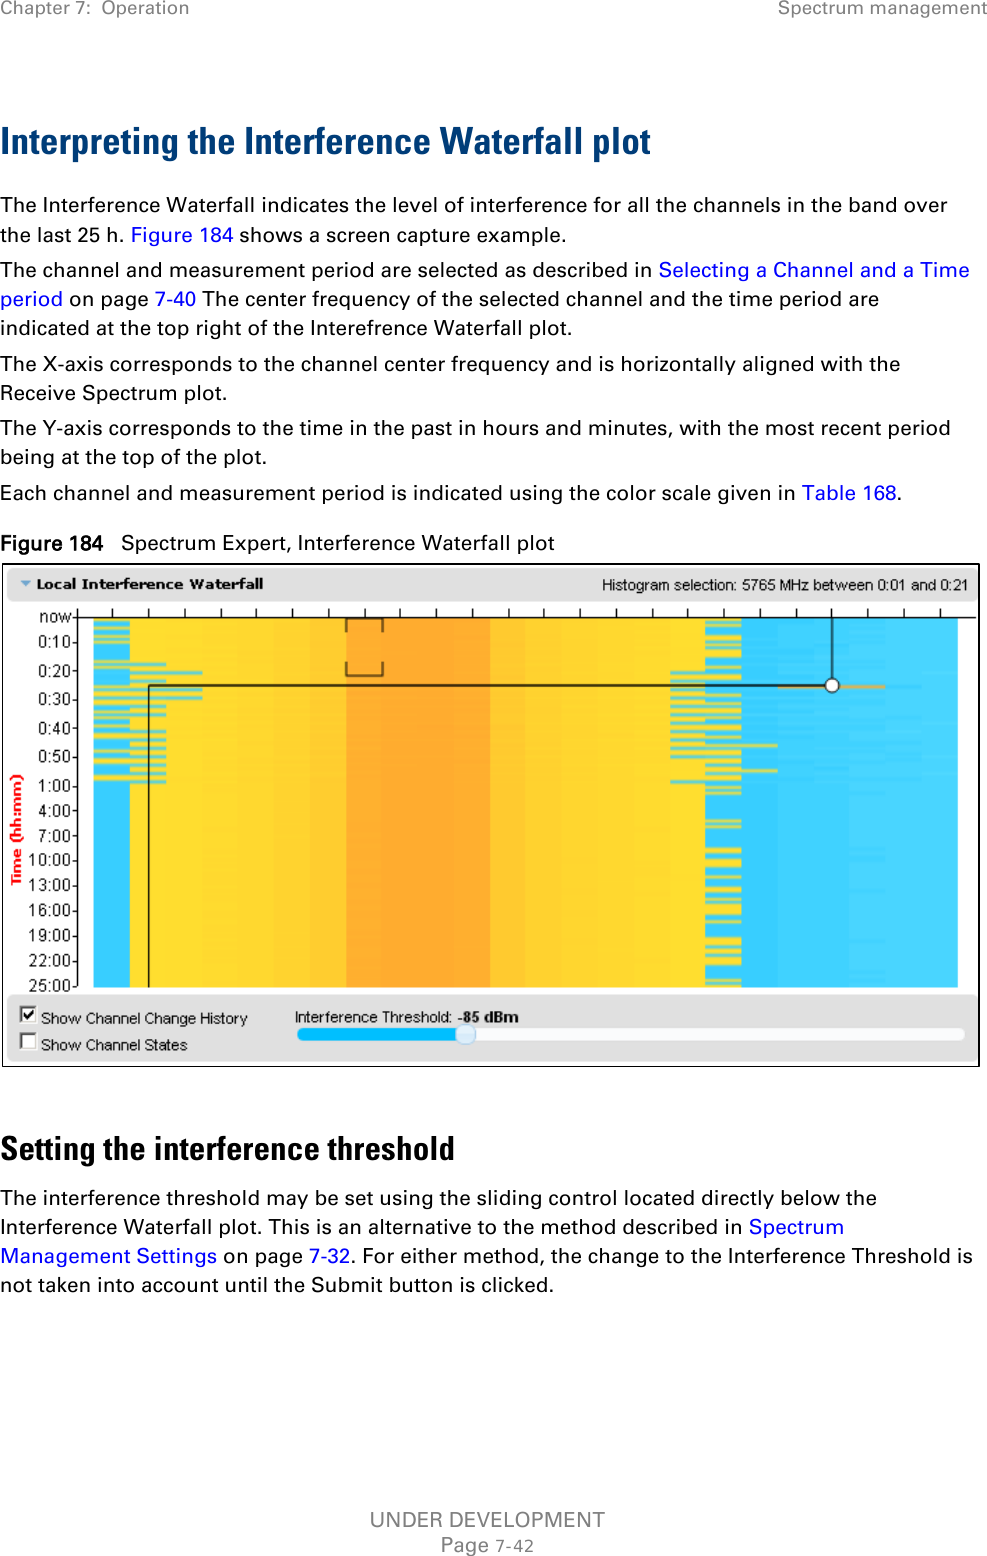 Chapter 7:  Operation Spectrum management  Interpreting the Interference Waterfall plot The Interference Waterfall indicates the level of interference for all the channels in the band over the last 25 h. Figure 184 shows a screen capture example. The channel and measurement period are selected as described in Selecting a Channel and a Time period on page 7-40 The center frequency of the selected channel and the time period are indicated at the top right of the Interefrence Waterfall plot. The X-axis corresponds to the channel center frequency and is horizontally aligned with the Receive Spectrum plot. The Y-axis corresponds to the time in the past in hours and minutes, with the most recent period being at the top of the plot. Each channel and measurement period is indicated using the color scale given in Table 168. Figure 184   Spectrum Expert, Interference Waterfall plot   Setting the interference threshold The interference threshold may be set using the sliding control located directly below the Interference Waterfall plot. This is an alternative to the method described in Spectrum Management Settings on page 7-32. For either method, the change to the Interference Threshold is not taken into account until the Submit button is clicked.   UNDER DEVELOPMENT Page 7-42 